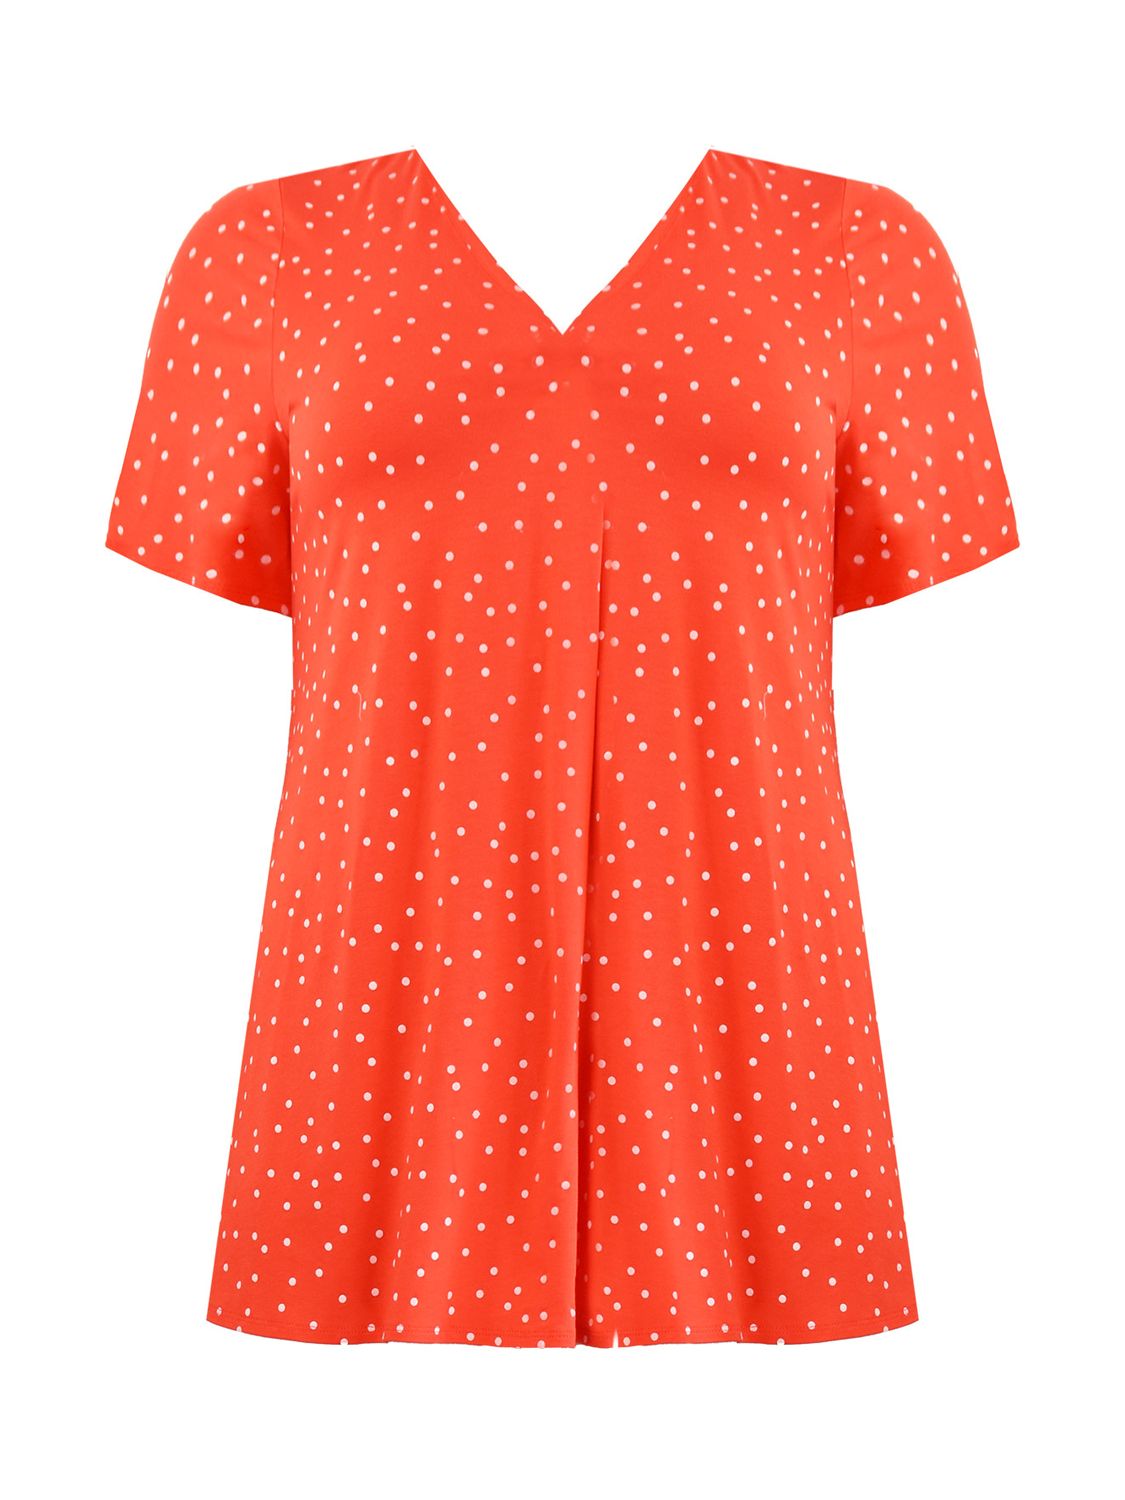 Buy Live Unlimited Spot Print Jersey Pleat Top, Red Online at johnlewis.com